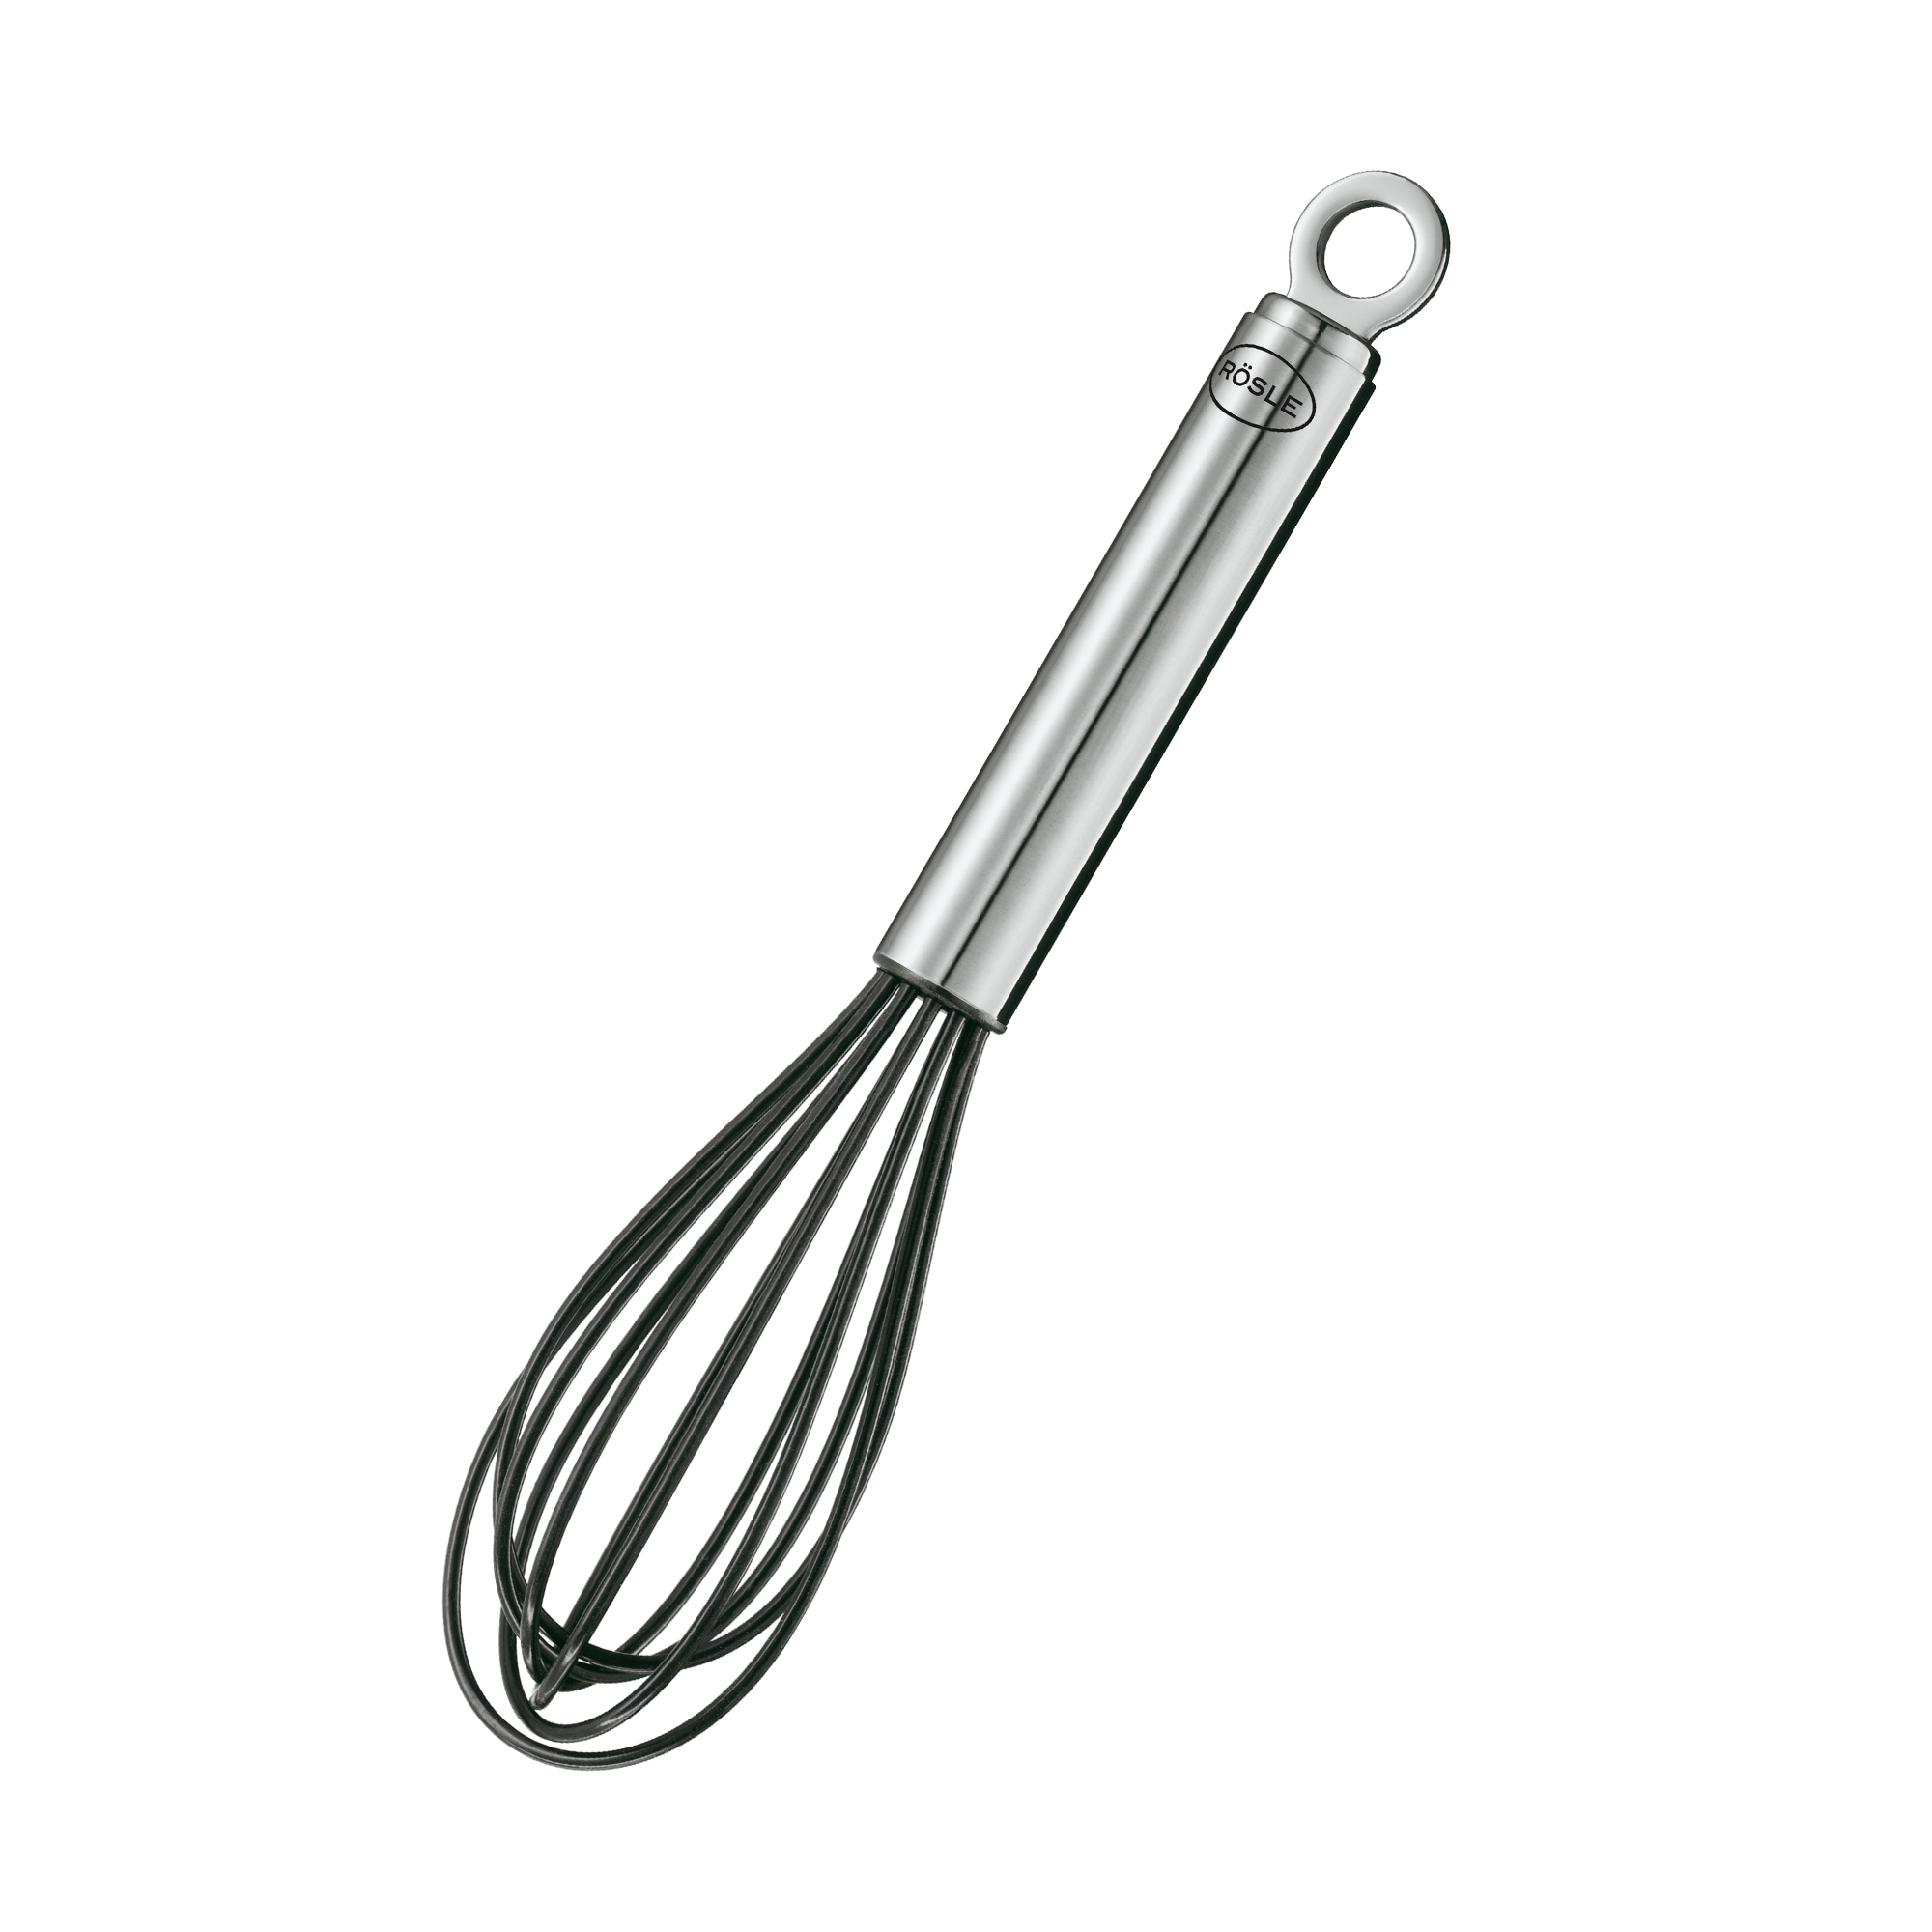 Egg Whisk silicone 22 cm|8.7 in.